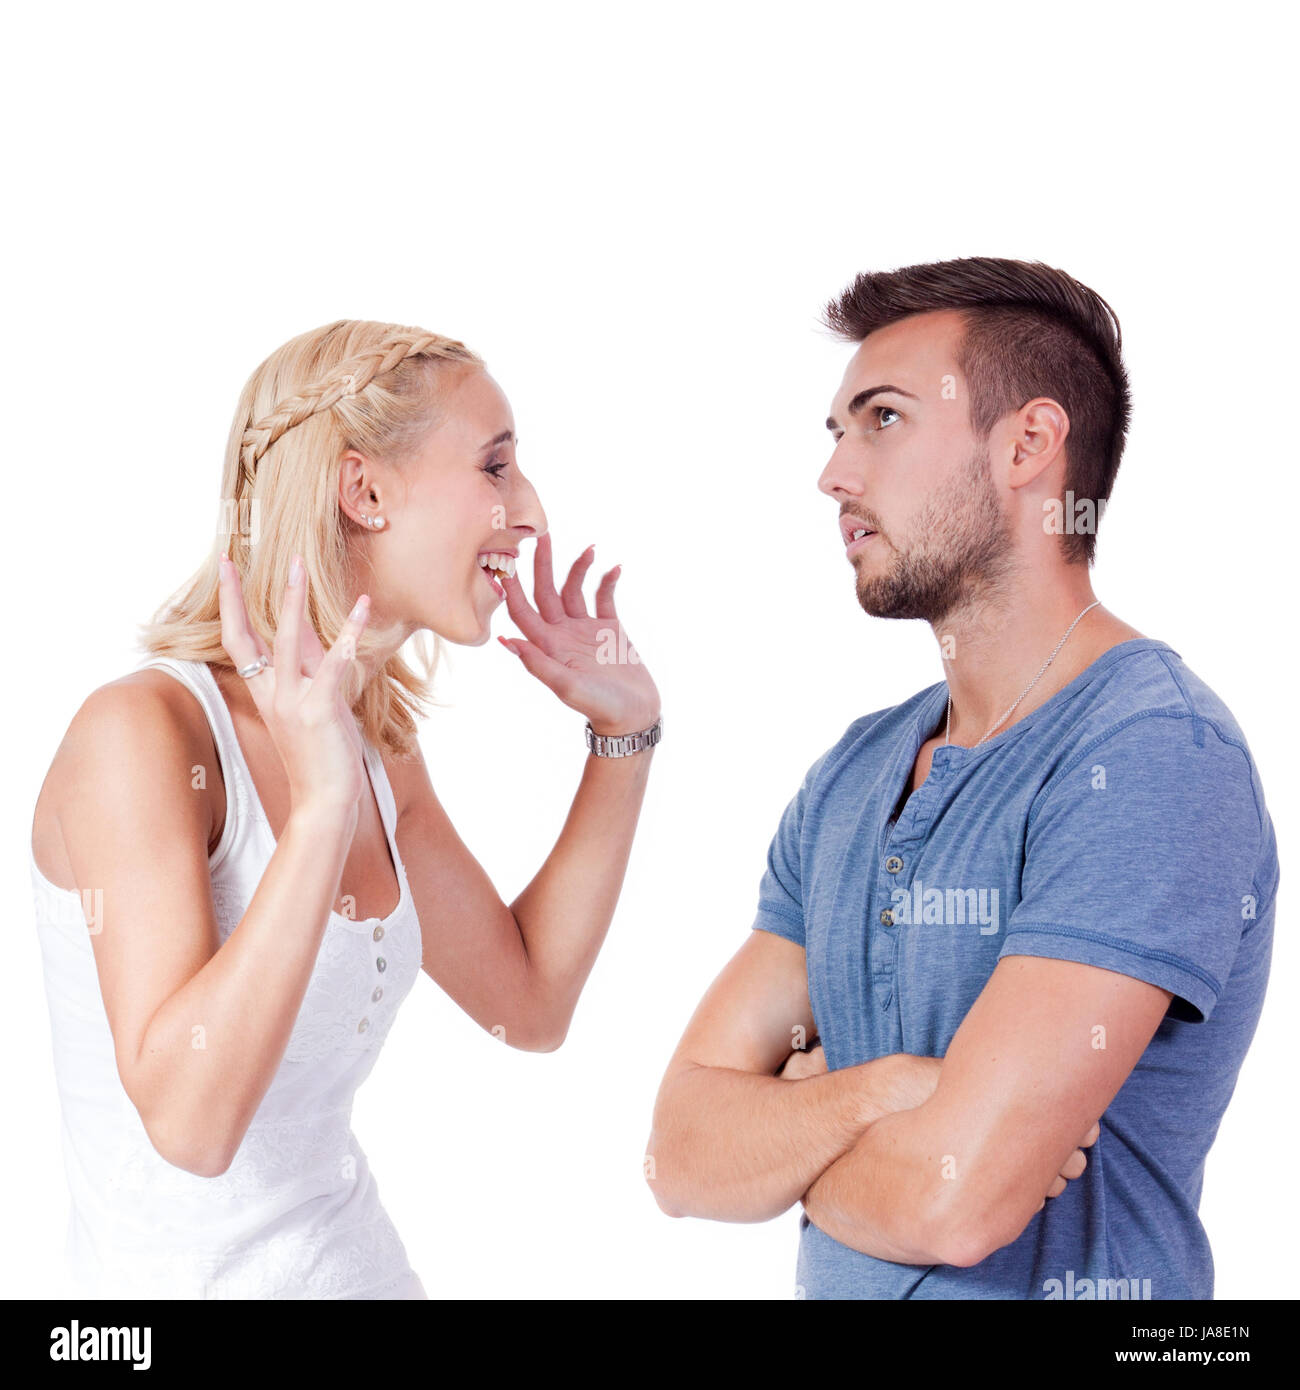 young woman discussed loudly with her boyfriend quarrel portrait Stock Photo